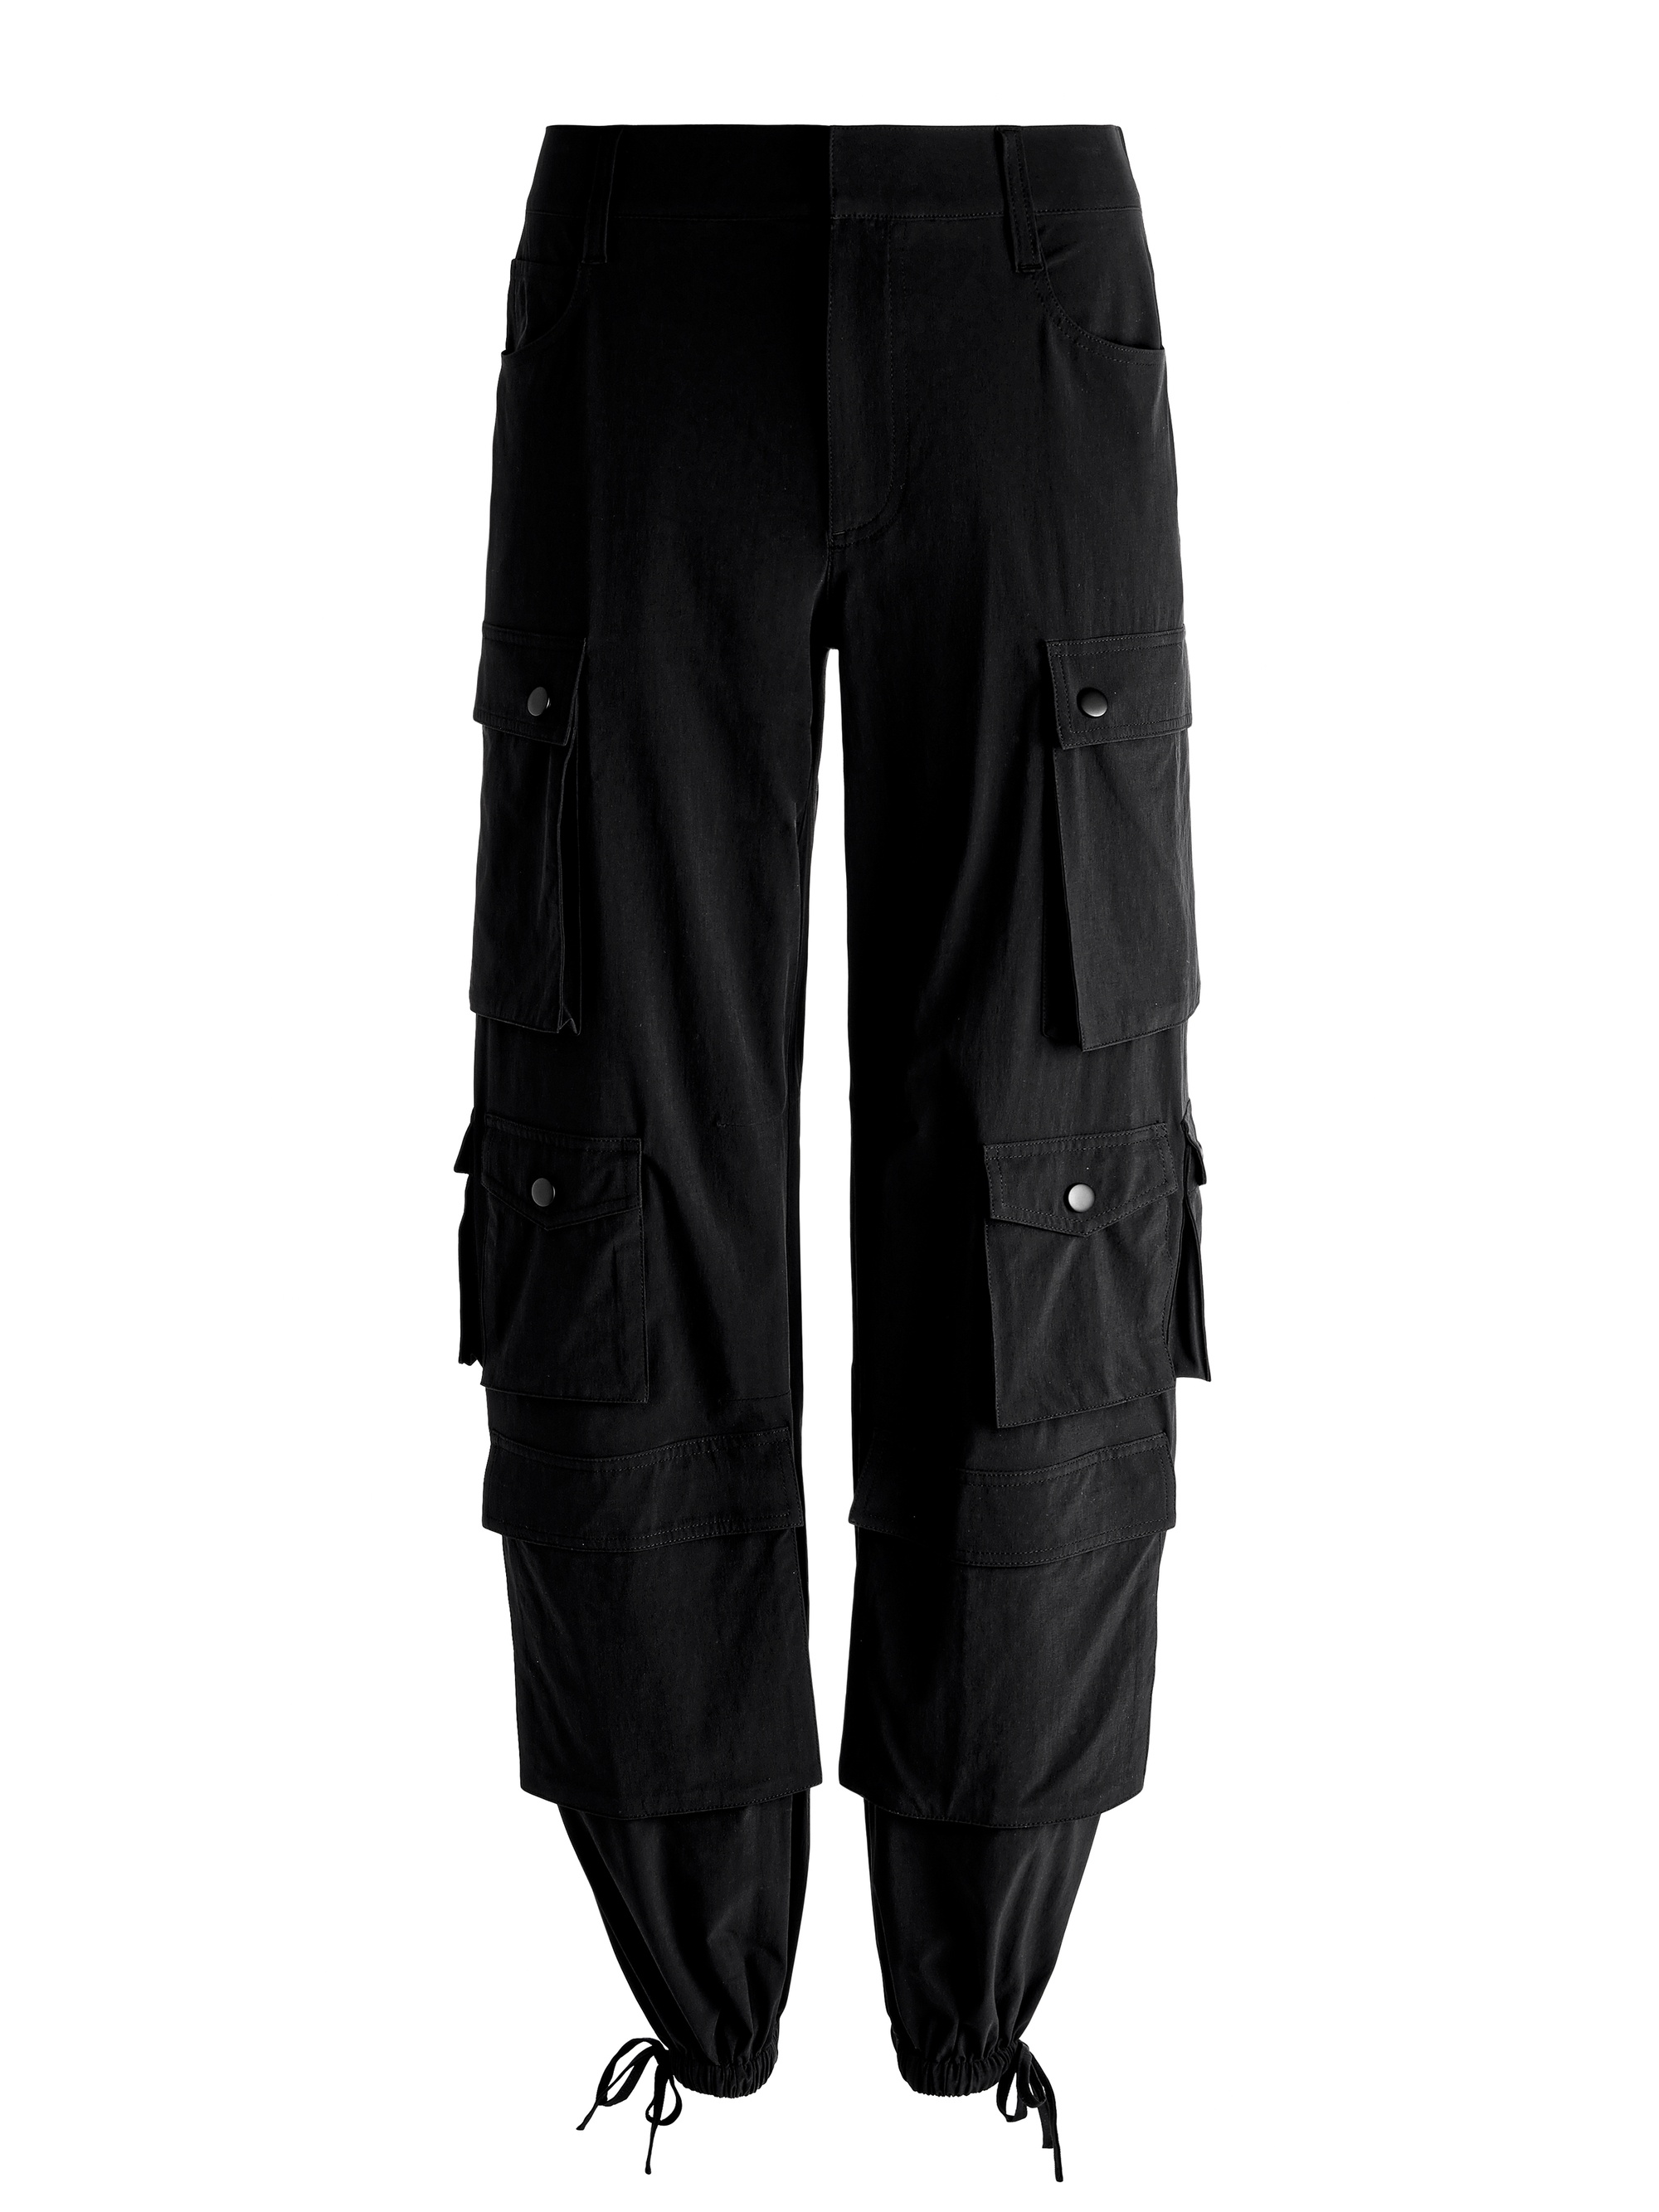 OLYMPIA MID RISE BAGGY CARGO PANTS - 1